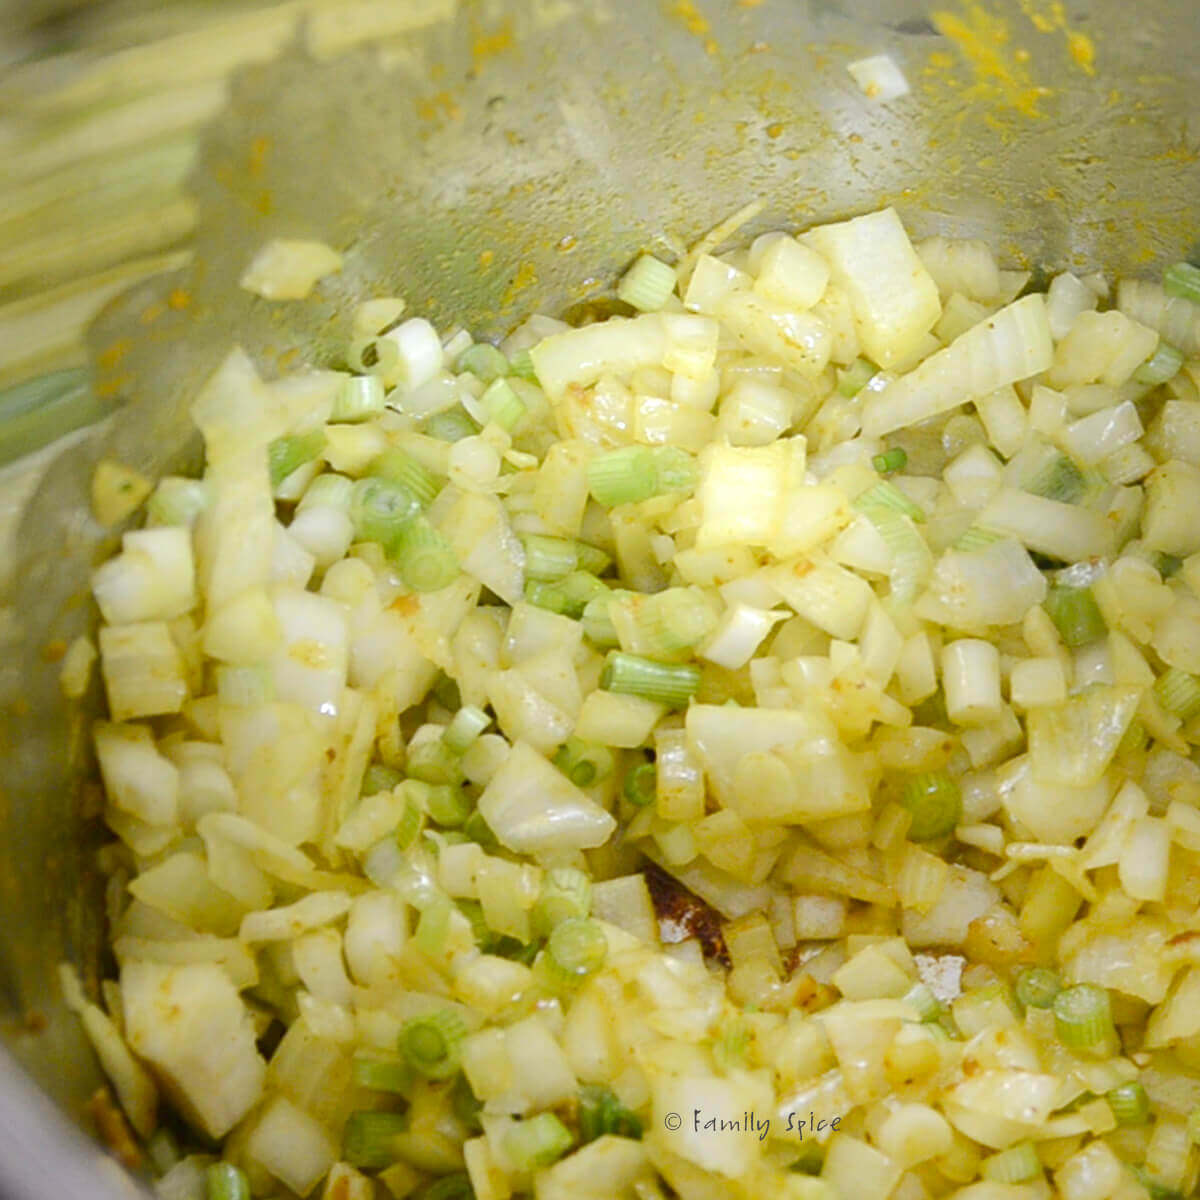 Sautéing chopped onions and the white part of green onions in an instant pot